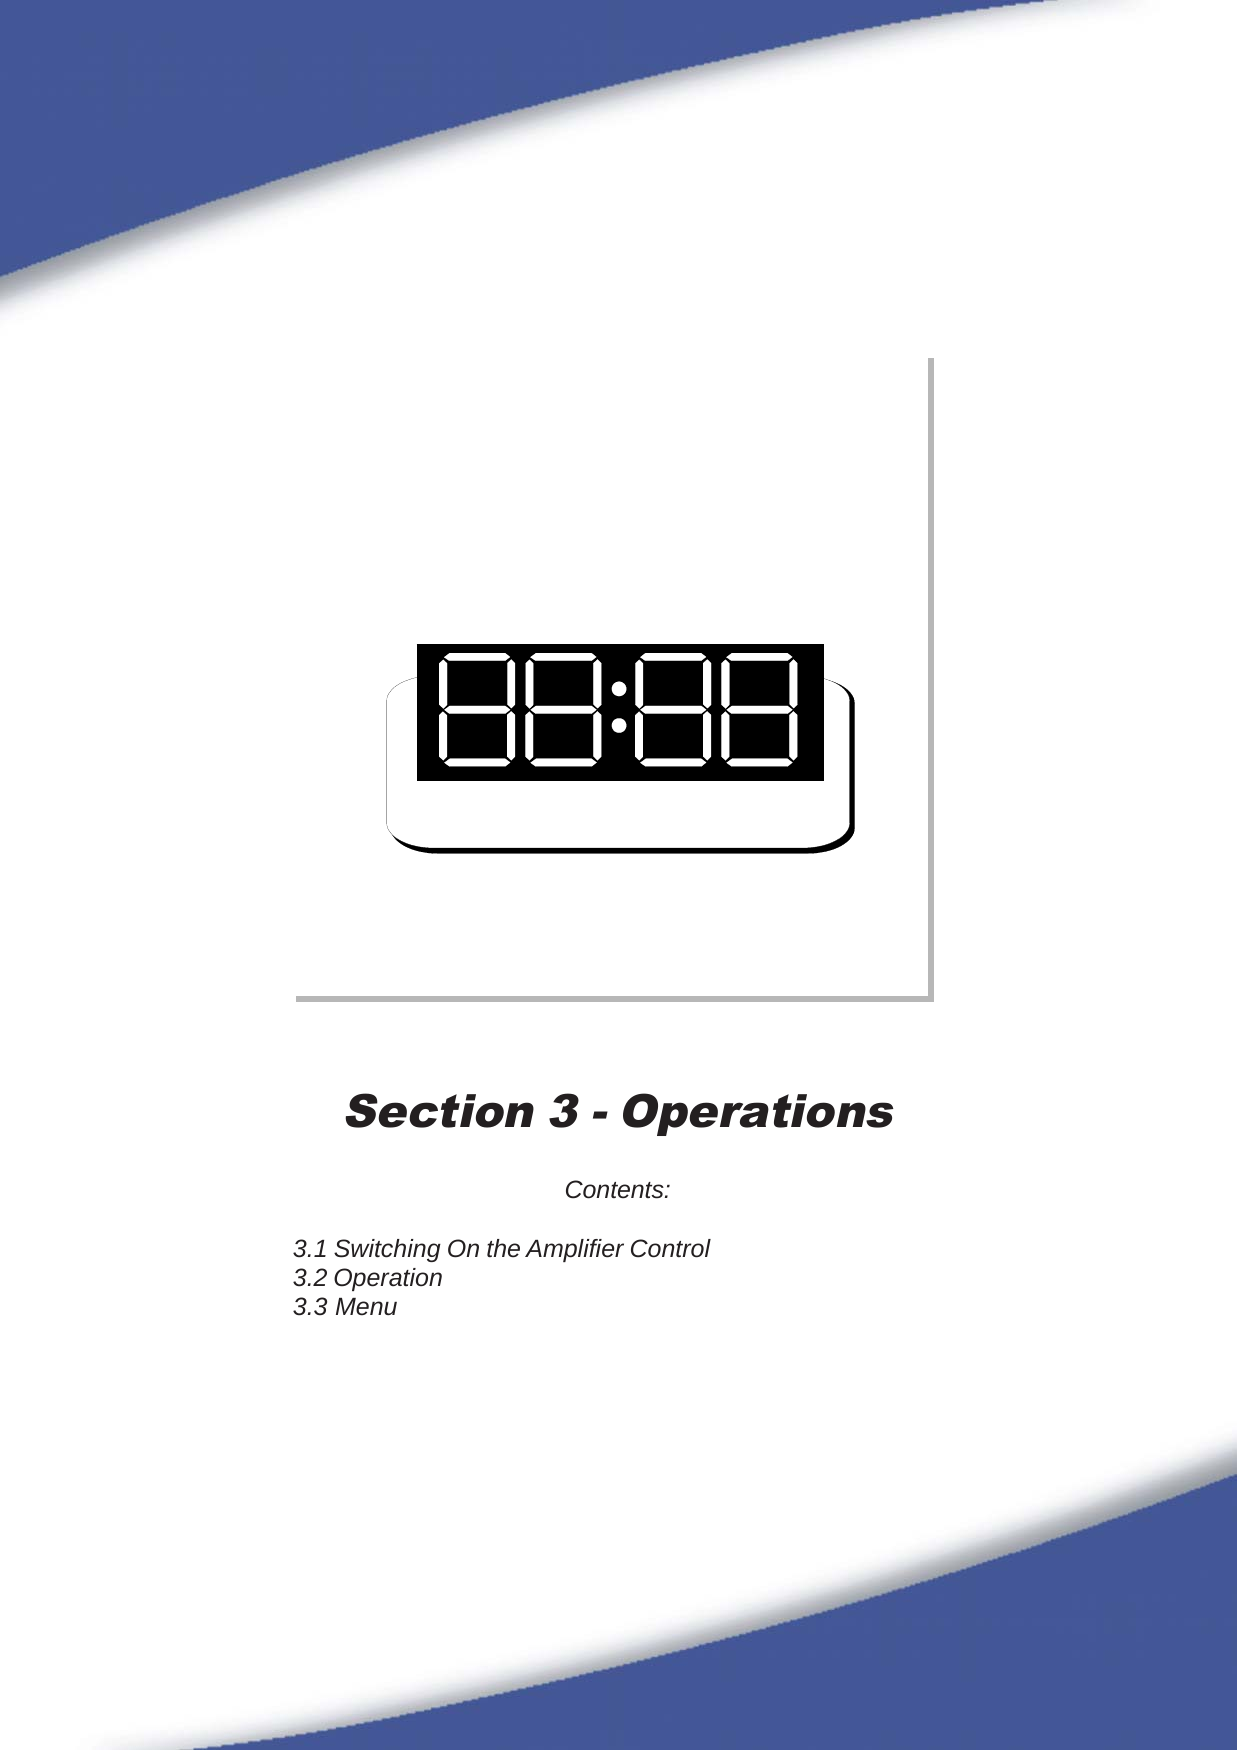 67Section 3 - OperationsContents:3.1 Switching On the Amplifier Control3.2 Operation3.3 Menu